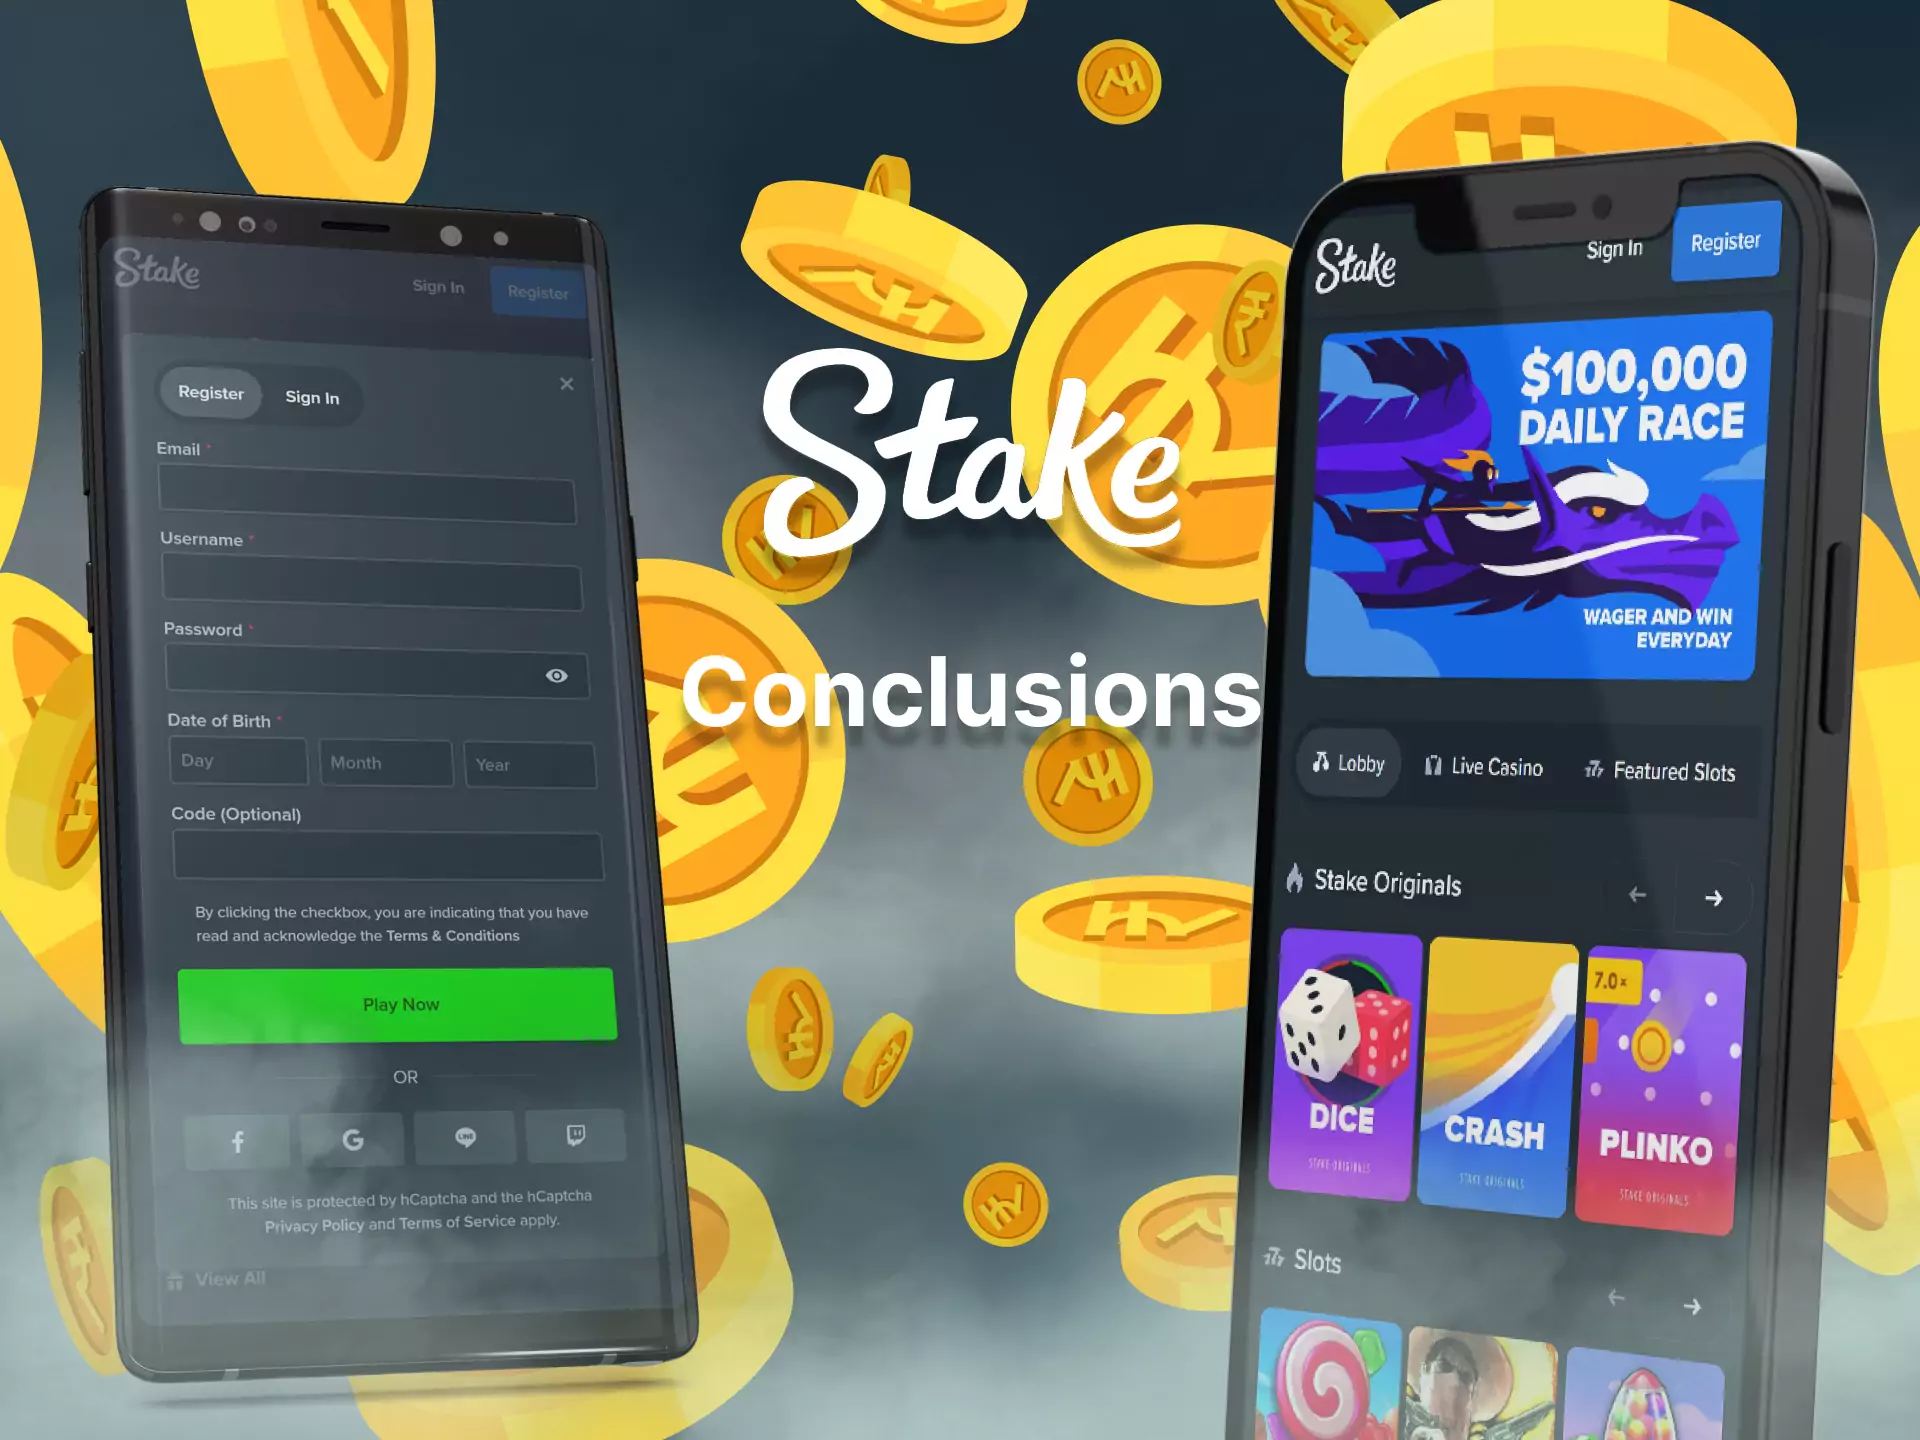 The main conclusions we made about the benefits of Stake.com.